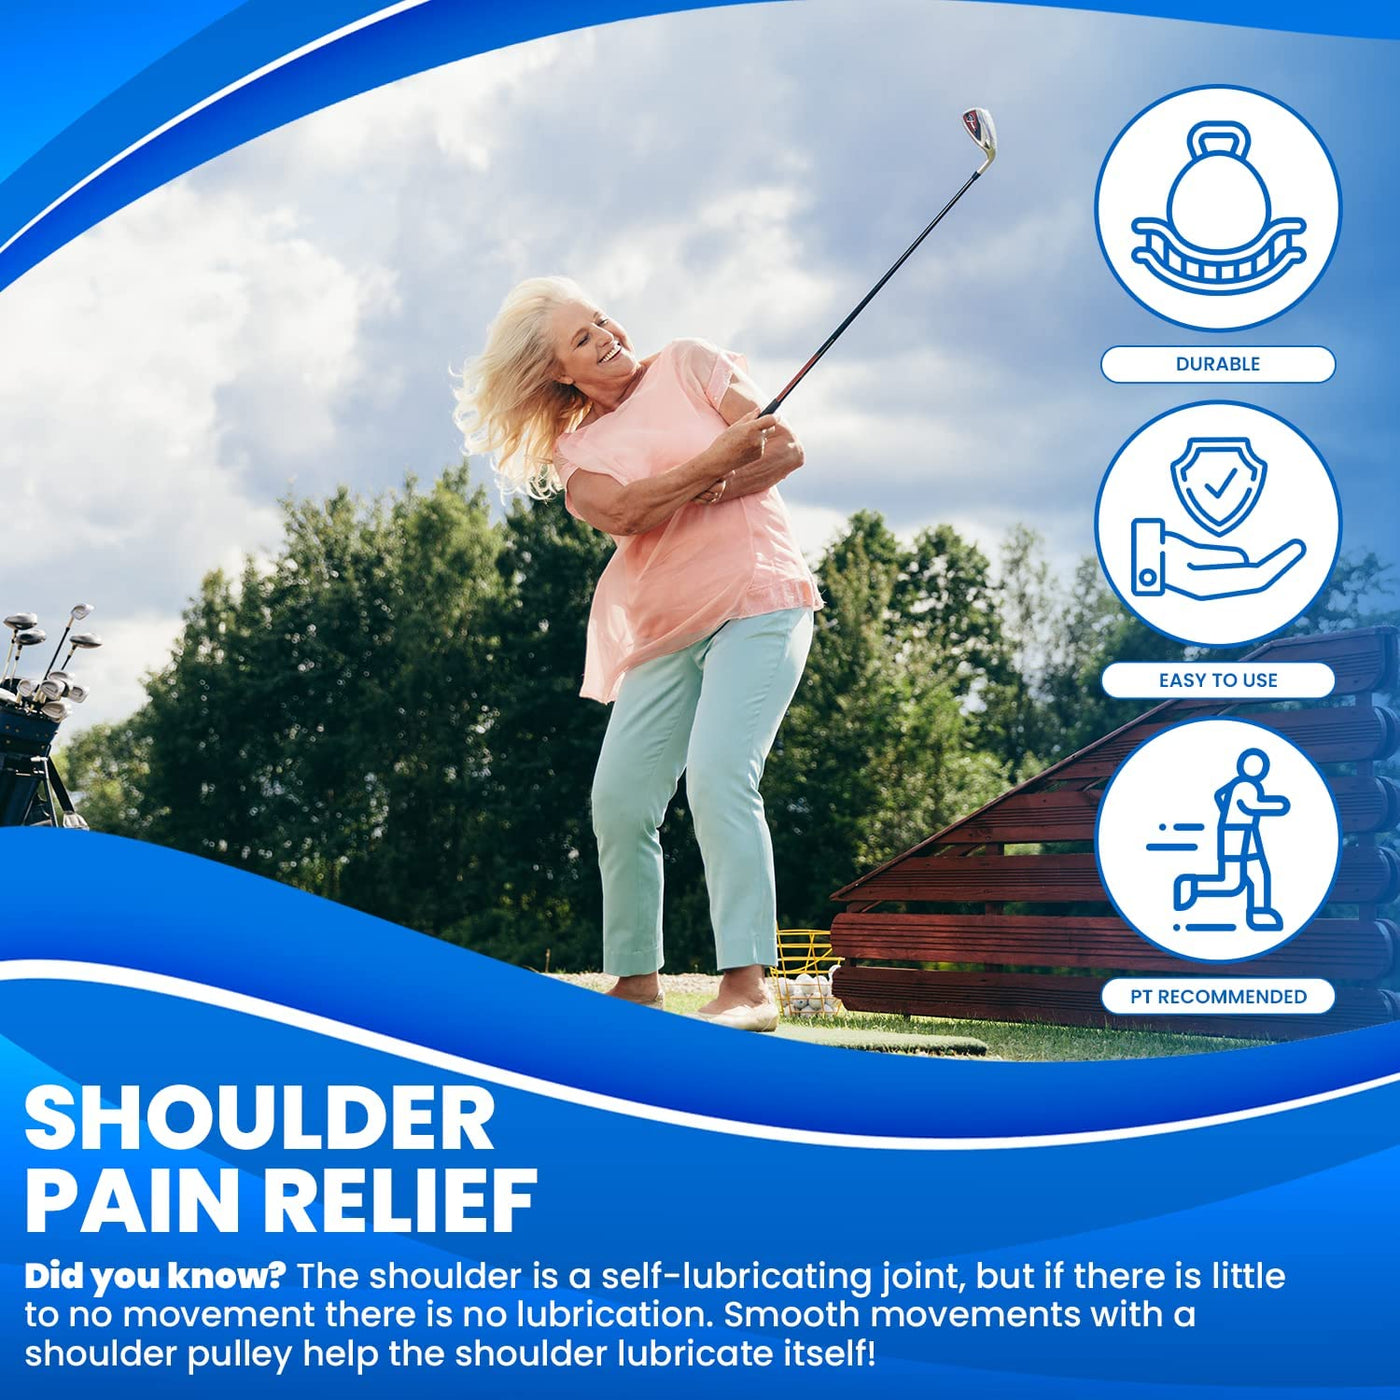 Blueranger Shoulder Pulley with Patient Guide Aids Recovery